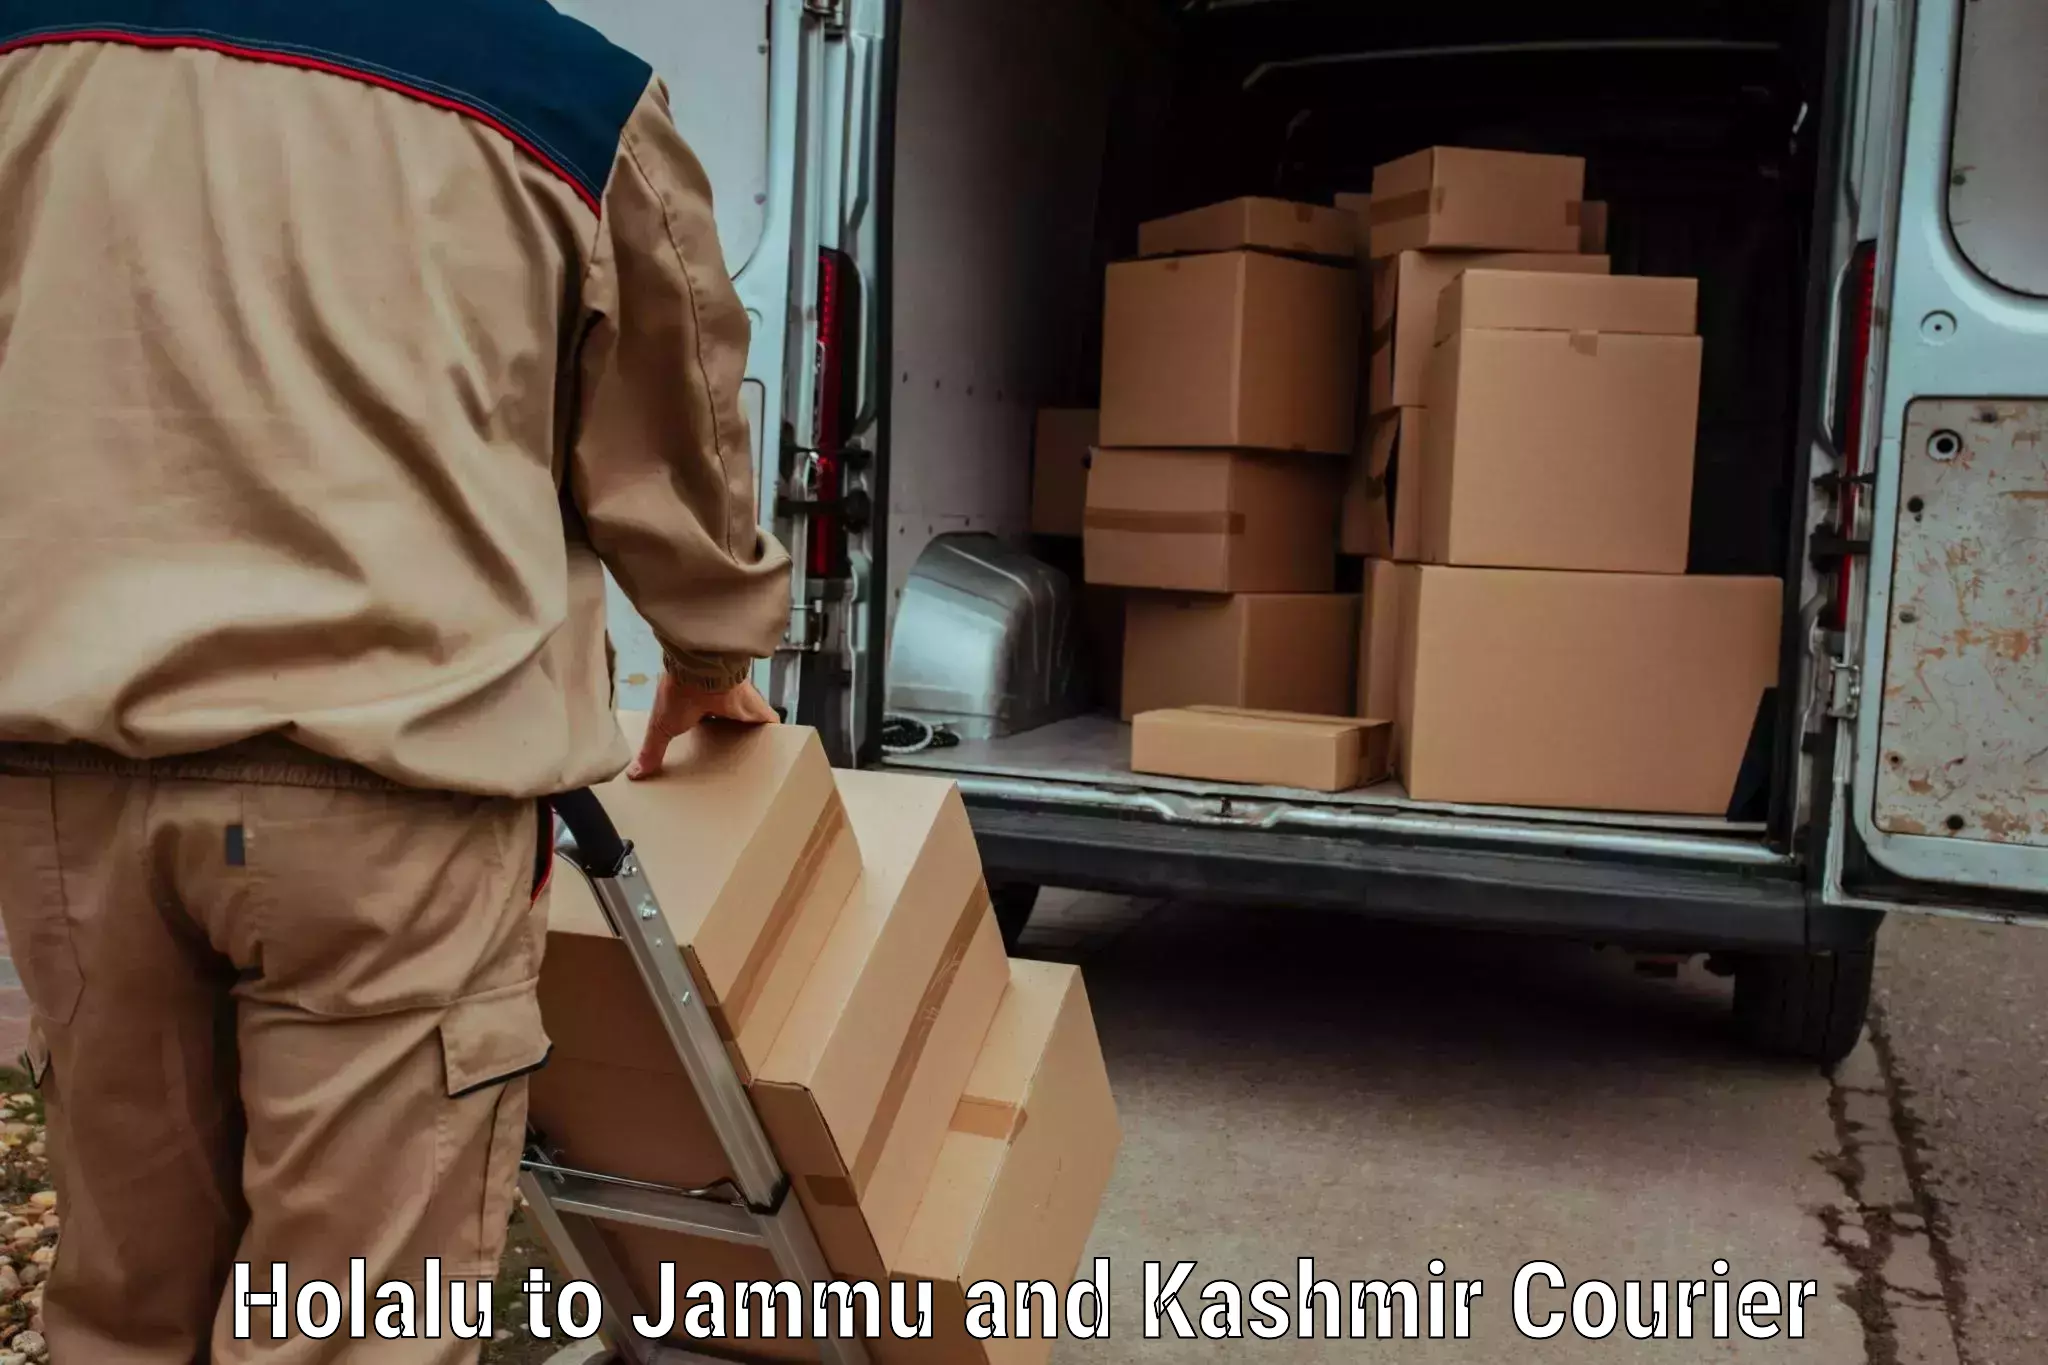 Express package services Holalu to University of Jammu